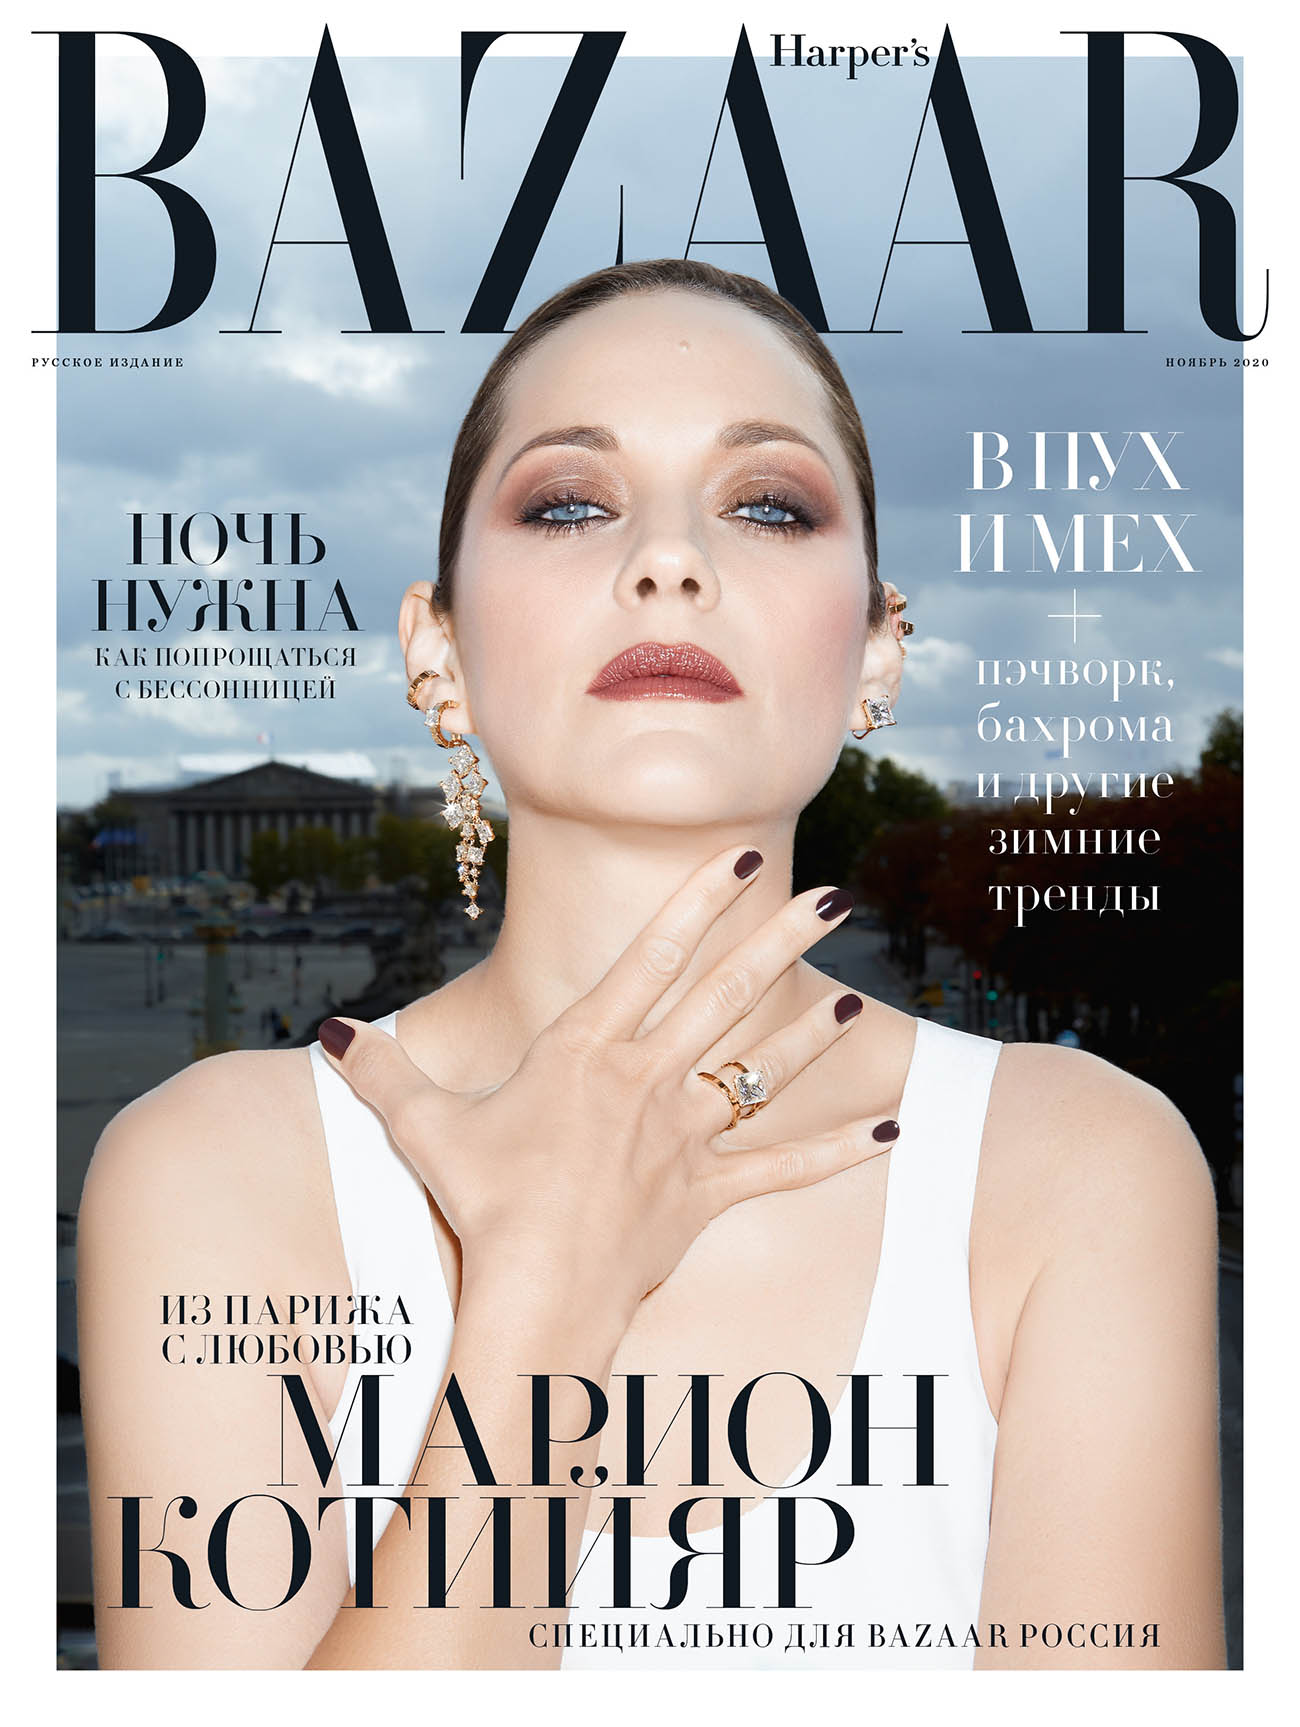 Marion Cotillard covers Harper’s Bazaar Russia November 2020 by Claire Rothstein